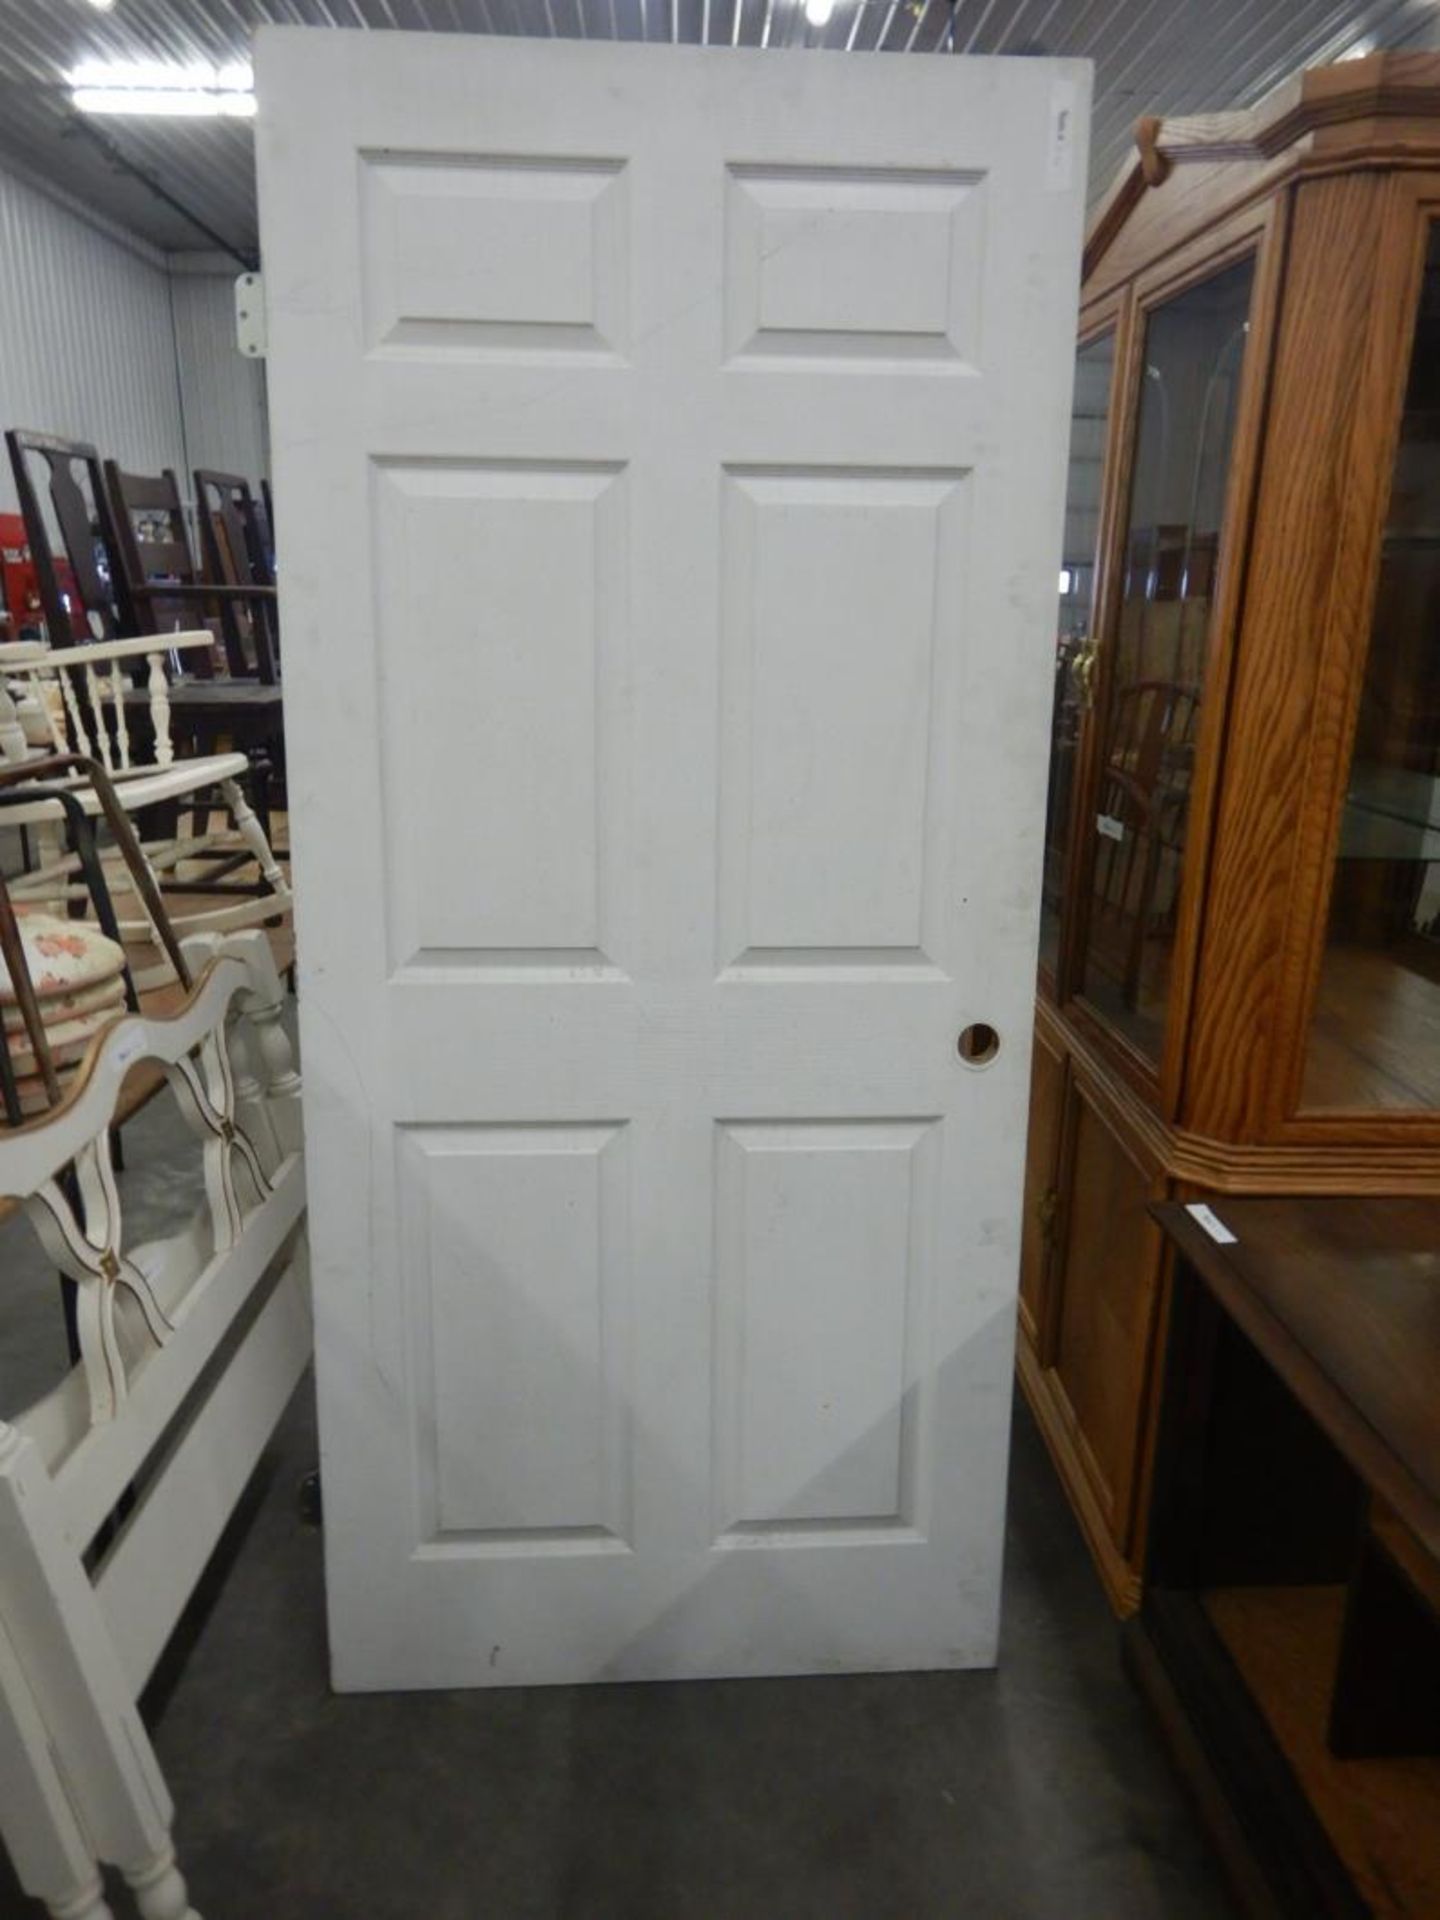 PREVIOUSLY INSTALLED 36" X 80 INTERIOR DOOR W/ HINGES - Image 2 of 2